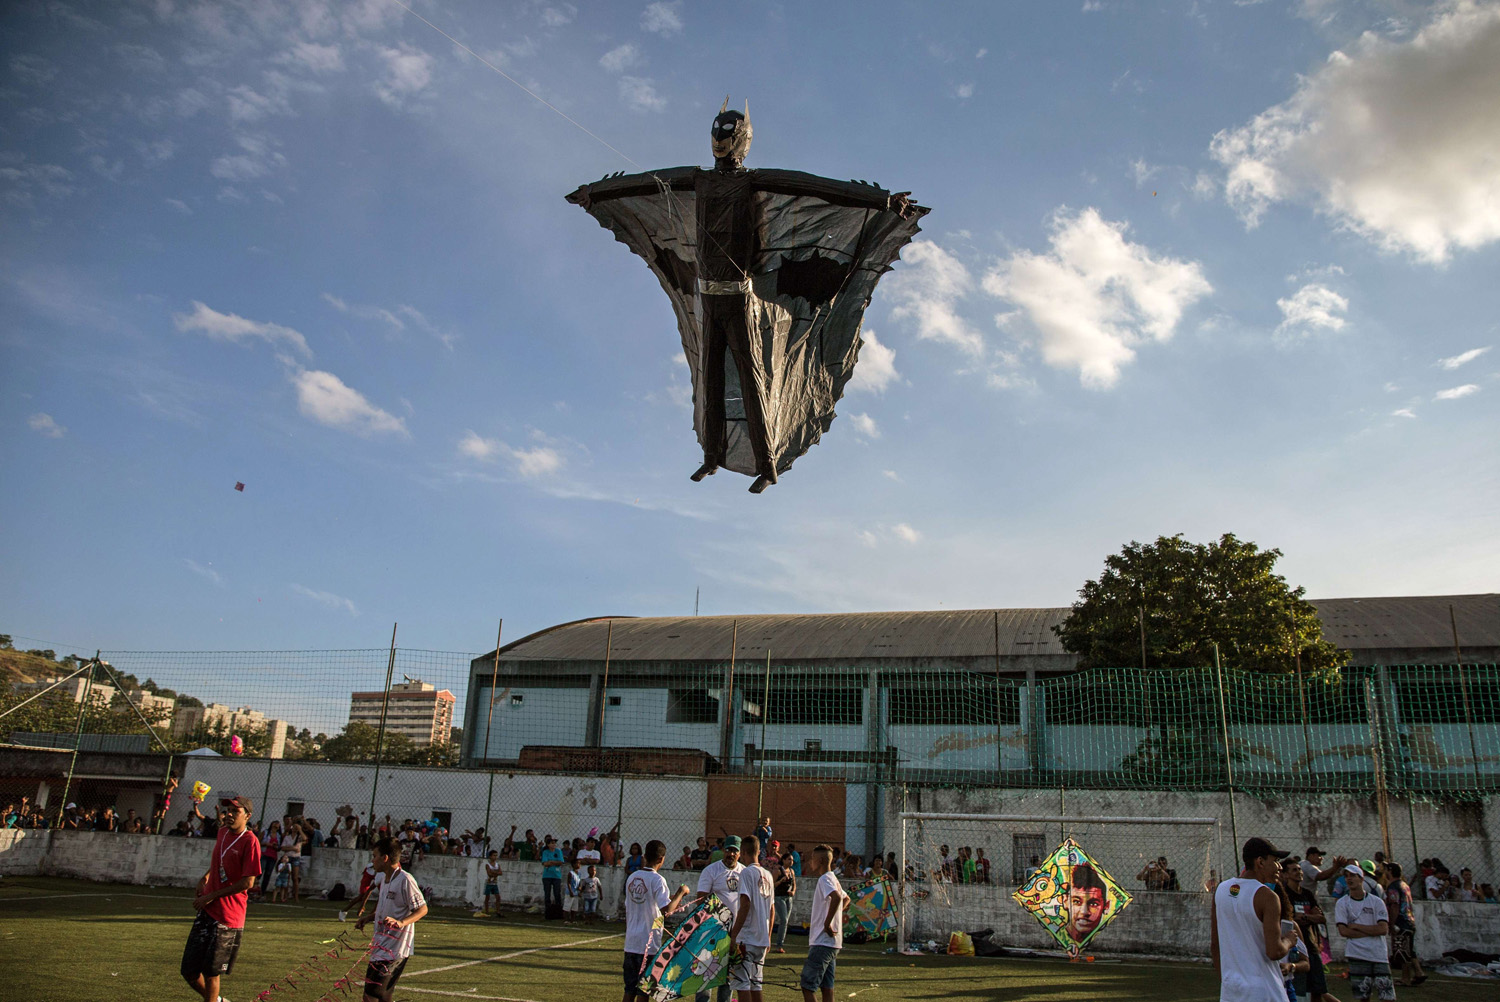 View of a Batman-shaped kite during the 30th kite-flying festival in Sao Goncalo, a surburb of Rio de Janeiro on Aug. 17, 2014.